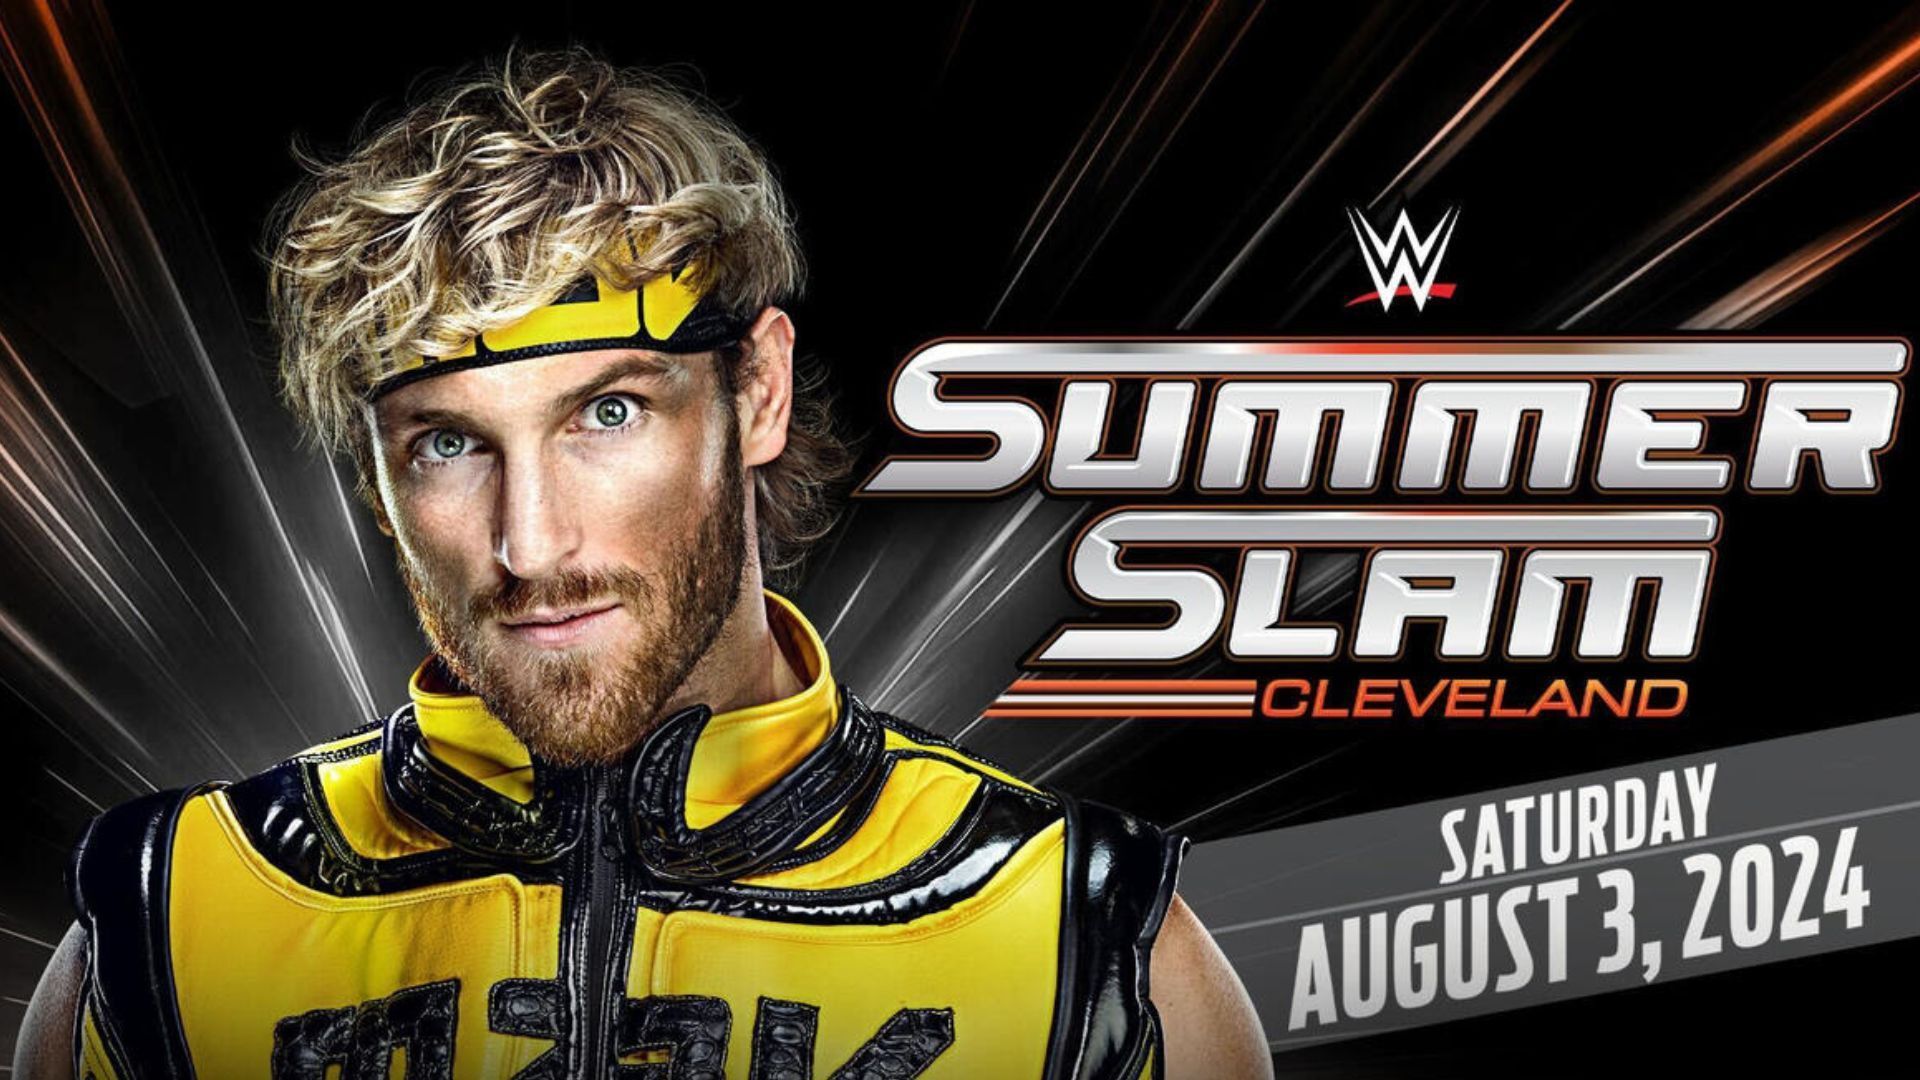 SummerSlam will take place in Cleveland this year.